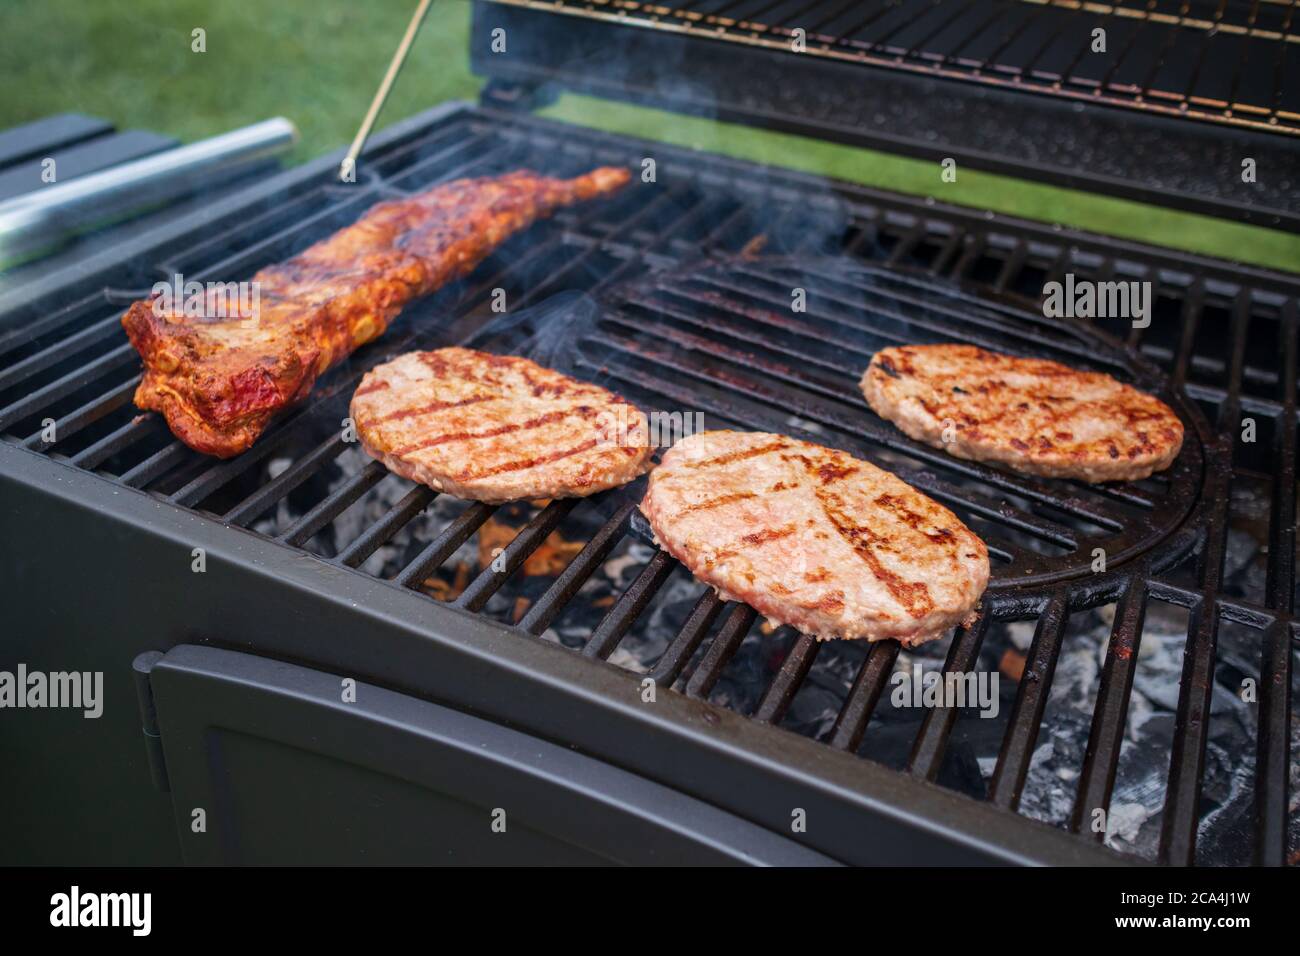 Home barbecue with charcoal in the backyard grilling steaks and other meats for carnivore diet. Stock Photo